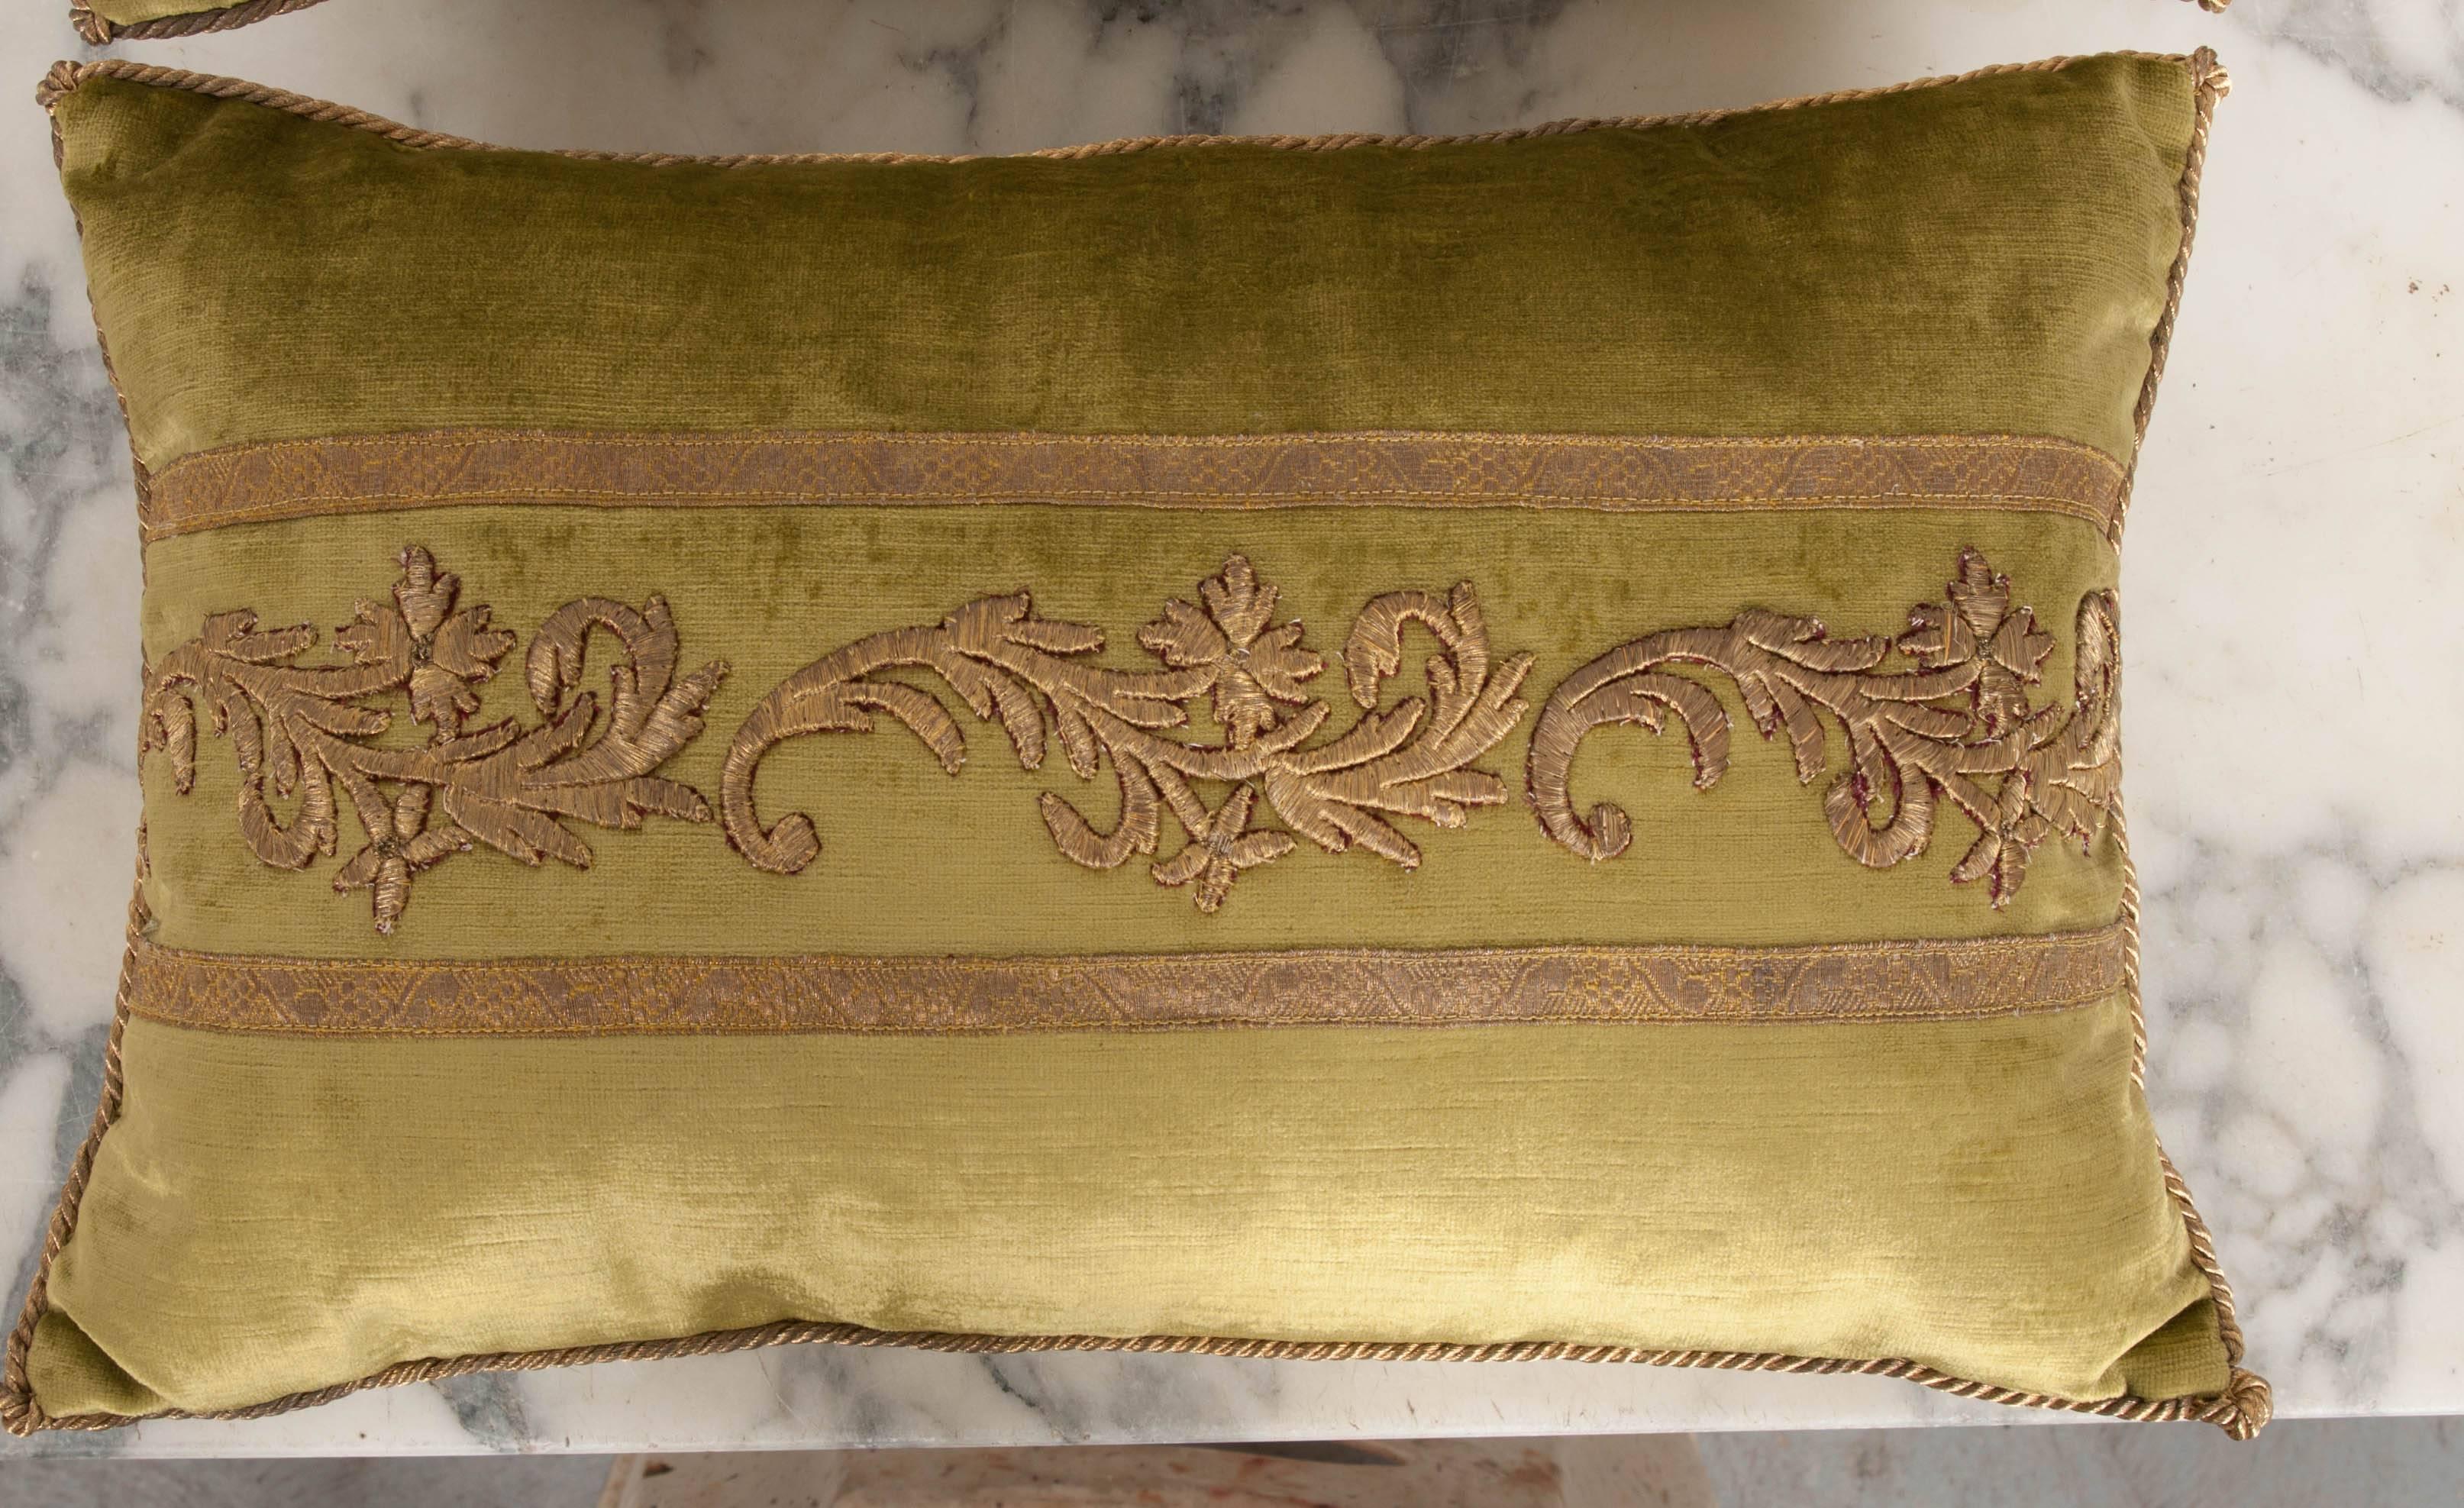 Antique ottoman Empire raised gold metallic embroidery bordered with antique gold metallic galon on chartreuse velvet. Hand trimmed with vintage gold metallic cording knotted in the corners. Down Filled. Available for individual purchase: